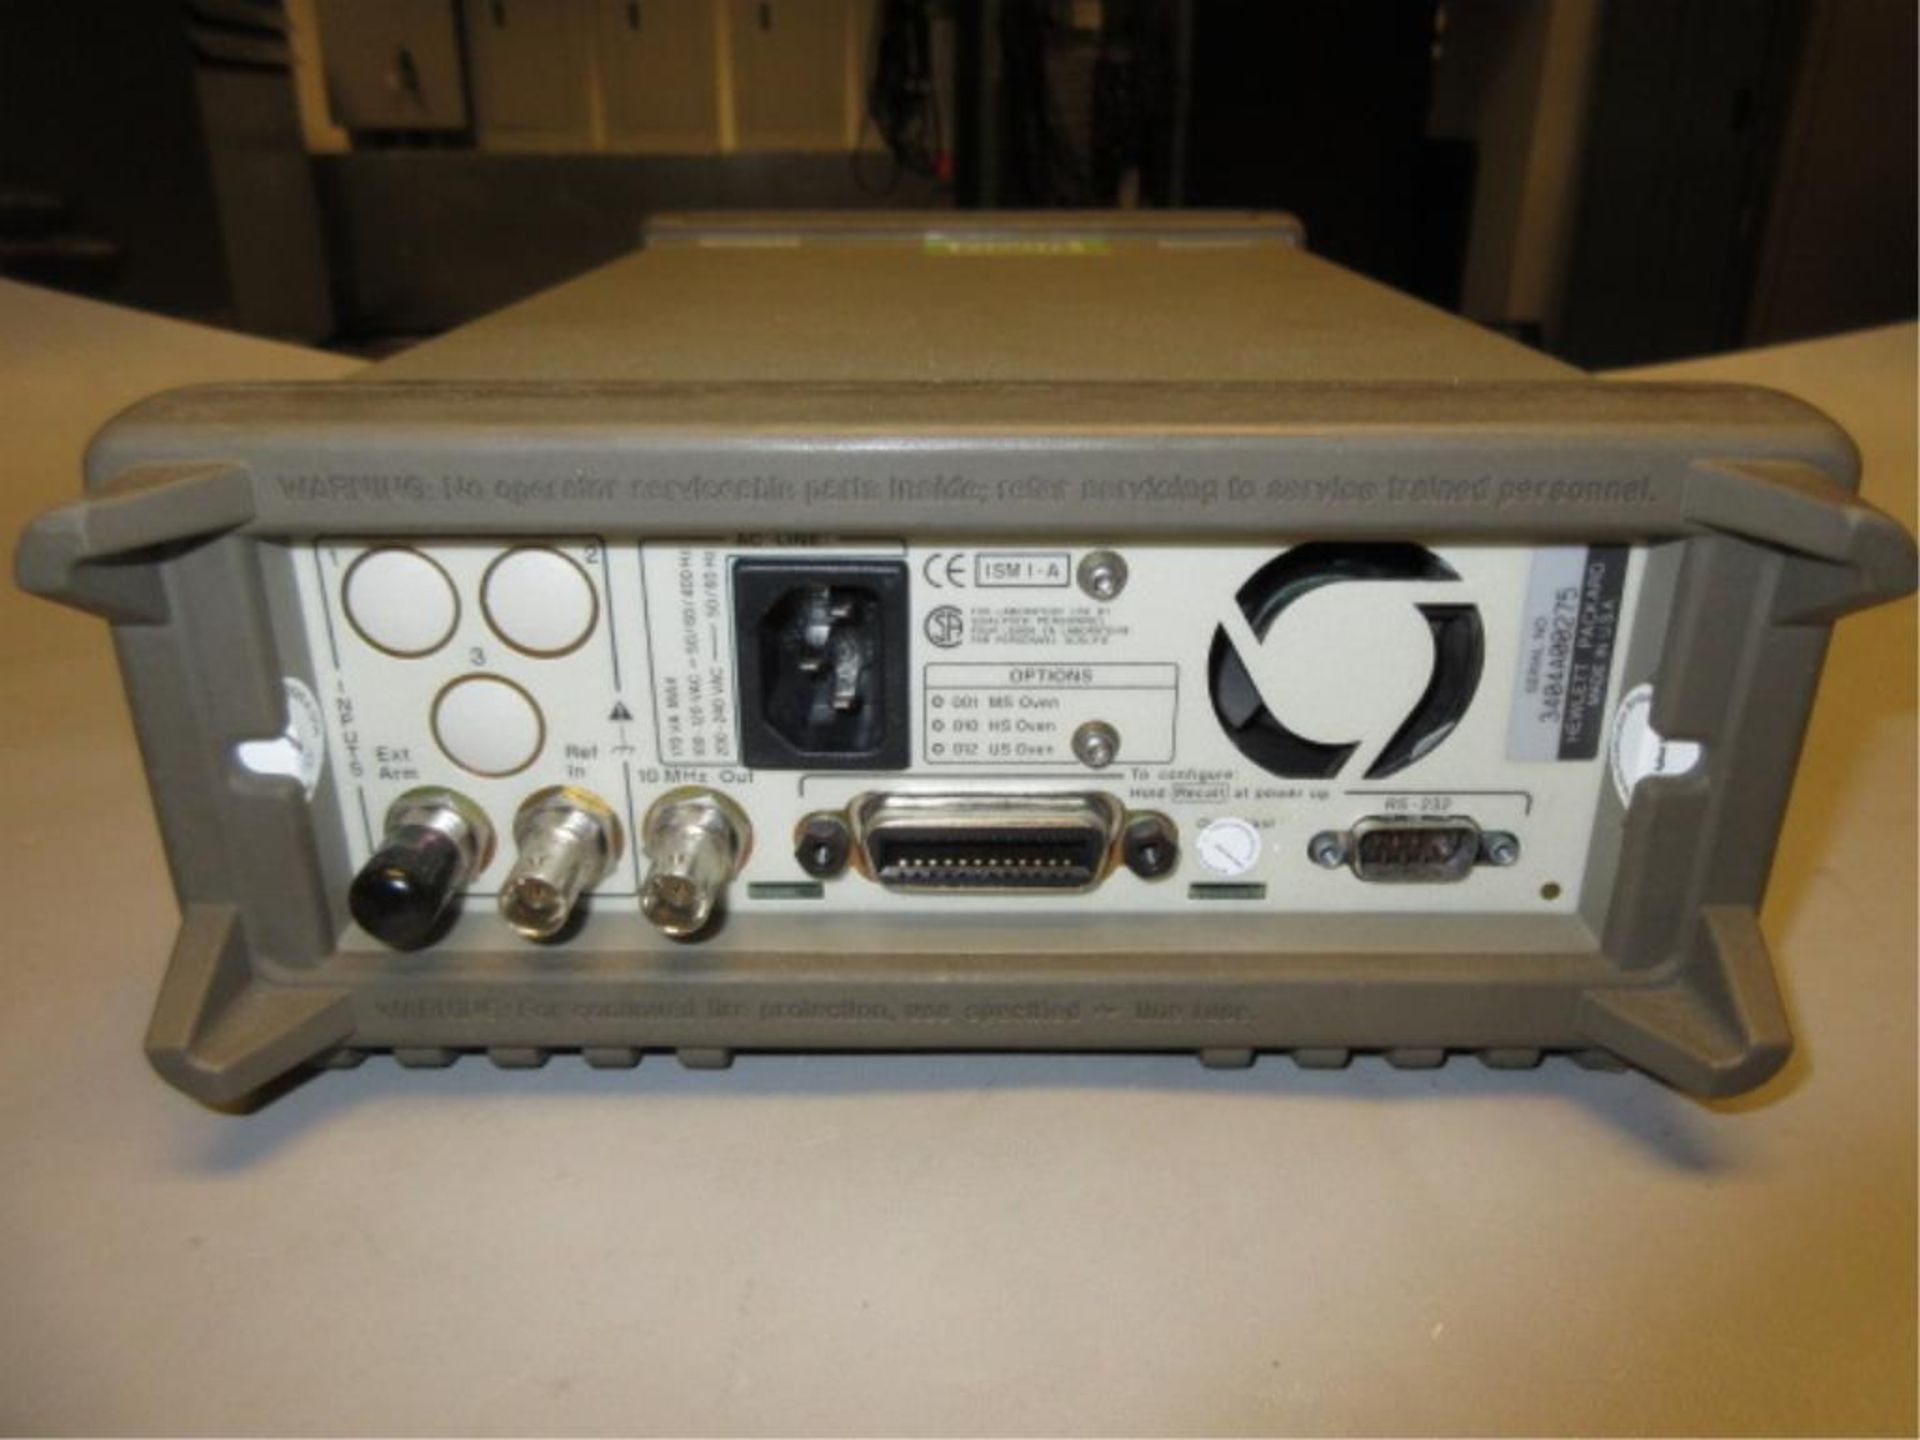 Hewlett Packard 53132A Universal Counter. Universal Counter, 225 MHz, 100-240v. SN# 3404A00275. - Image 3 of 3